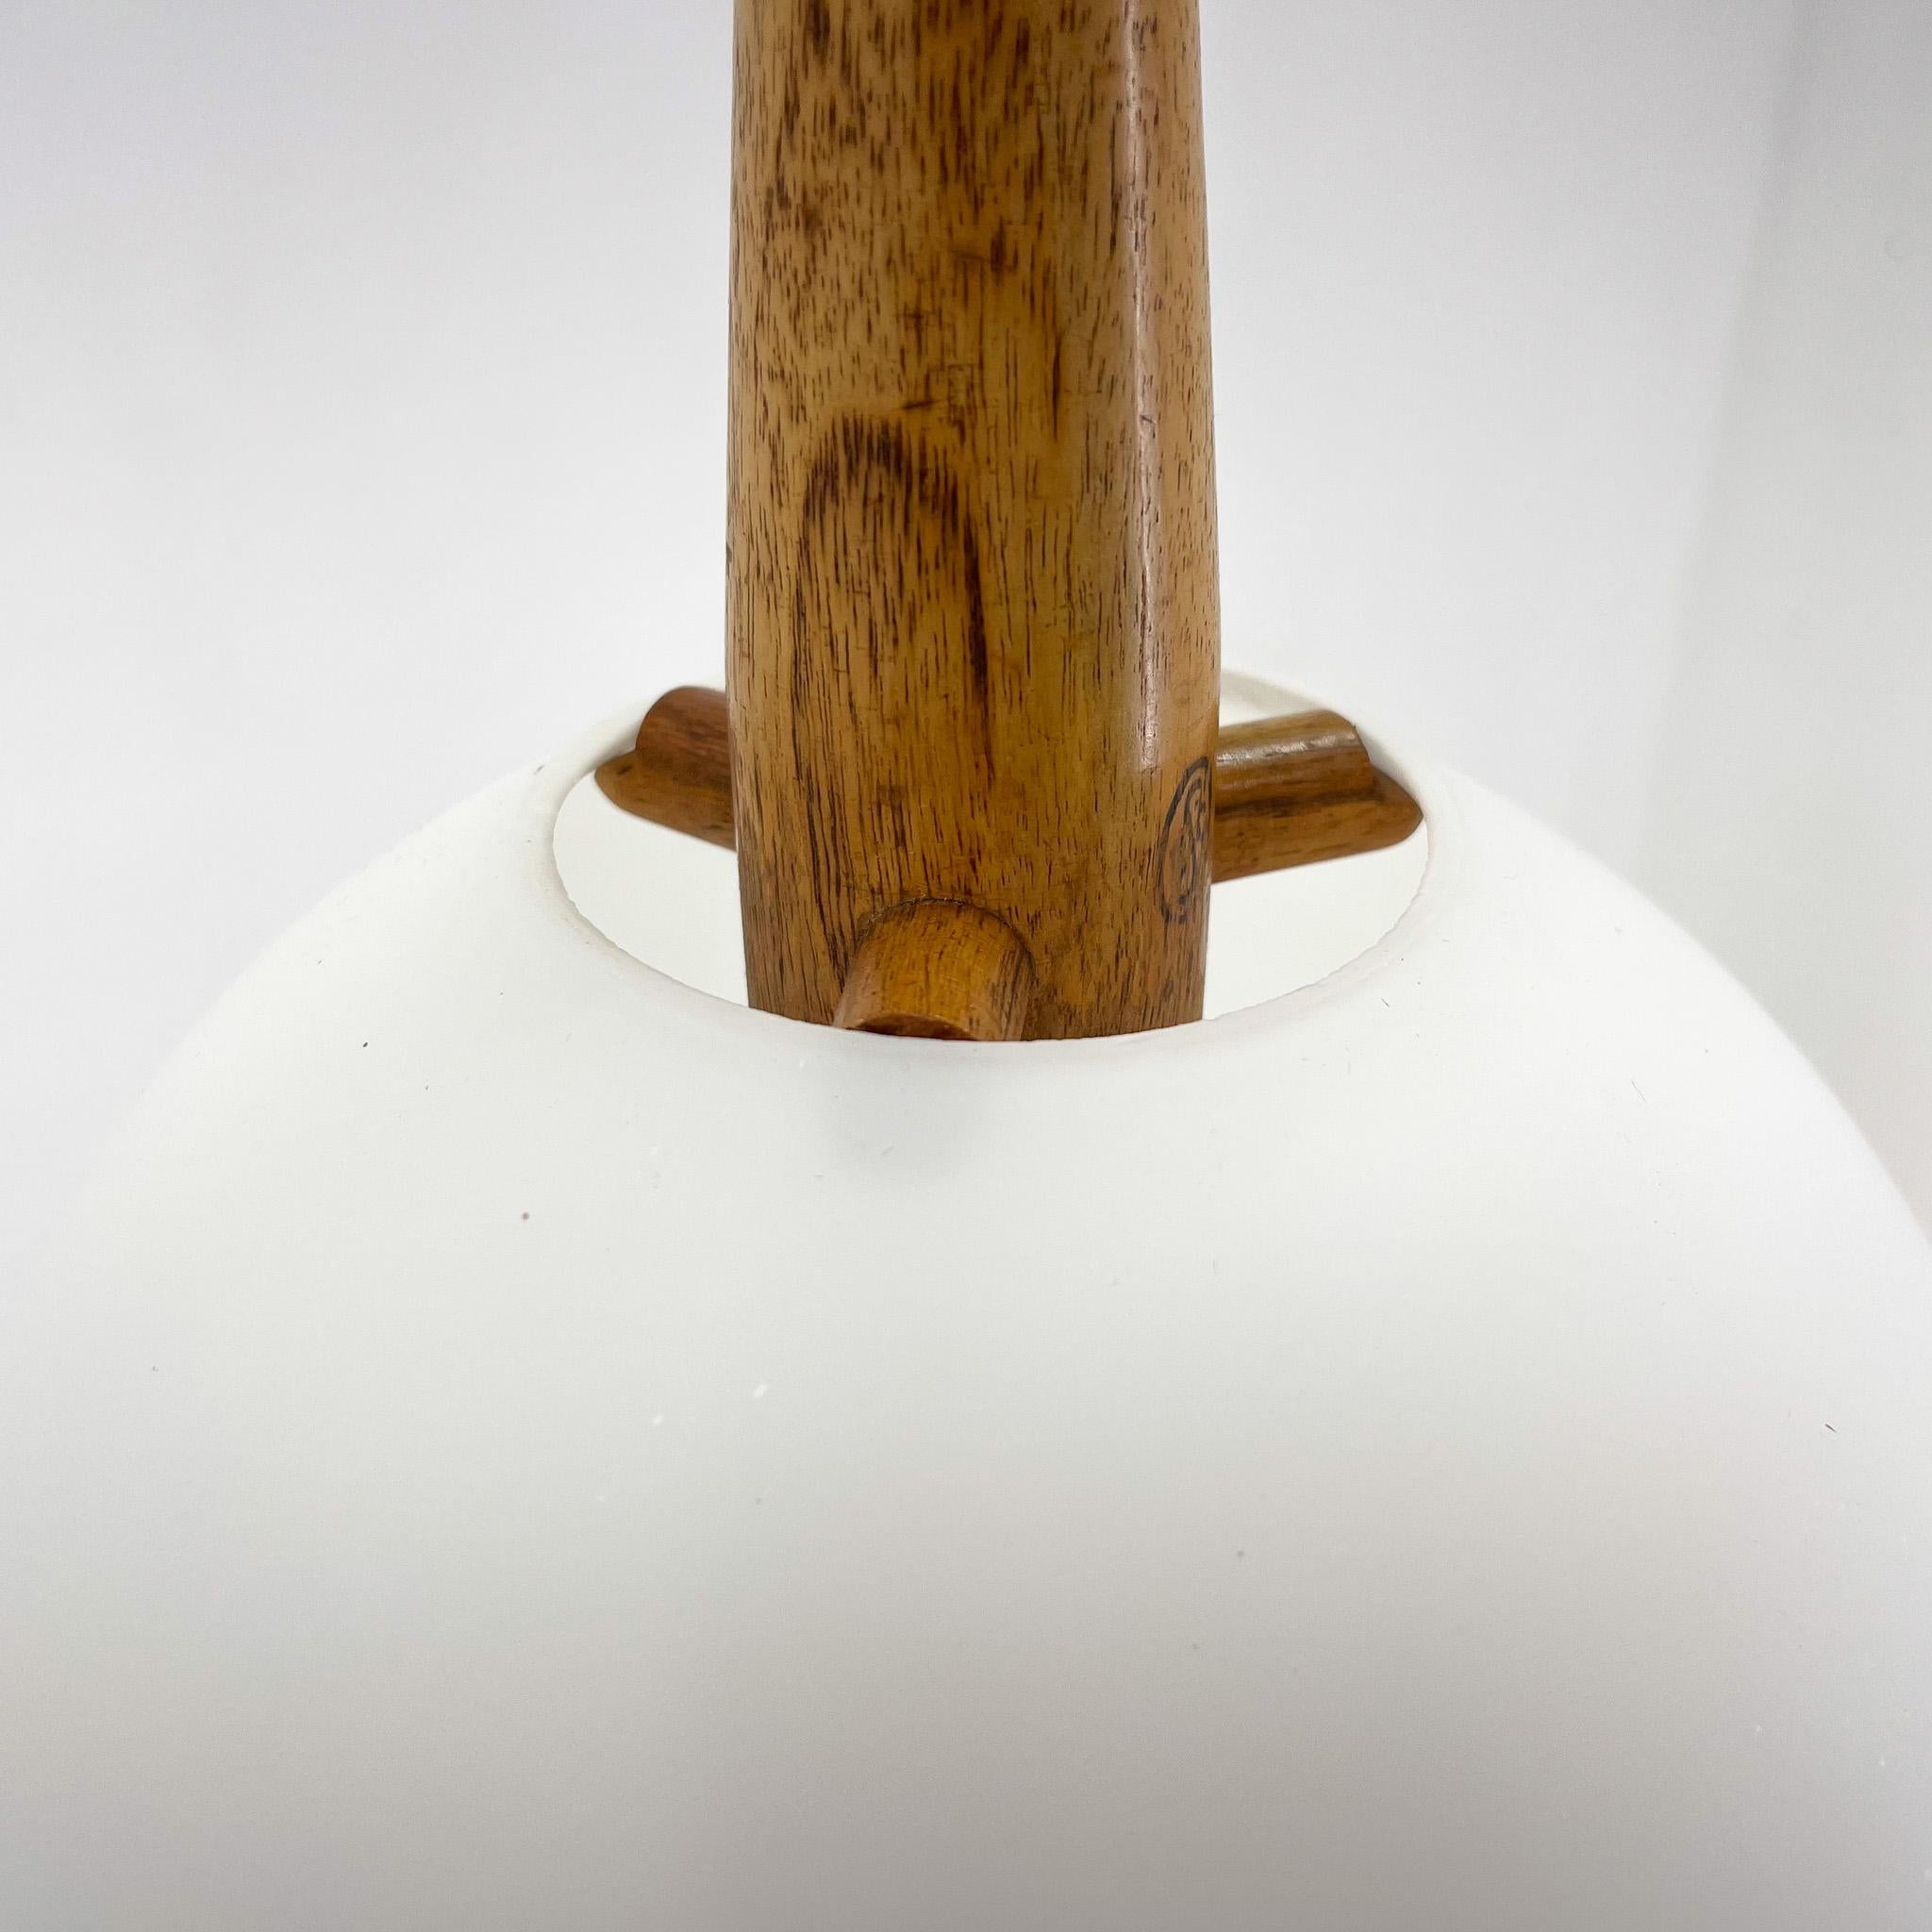 1960s Wood and Glass Pendant Light by ULUV, Czechoslovakia, Marked by Manufactur In Good Condition For Sale In Praha, CZ